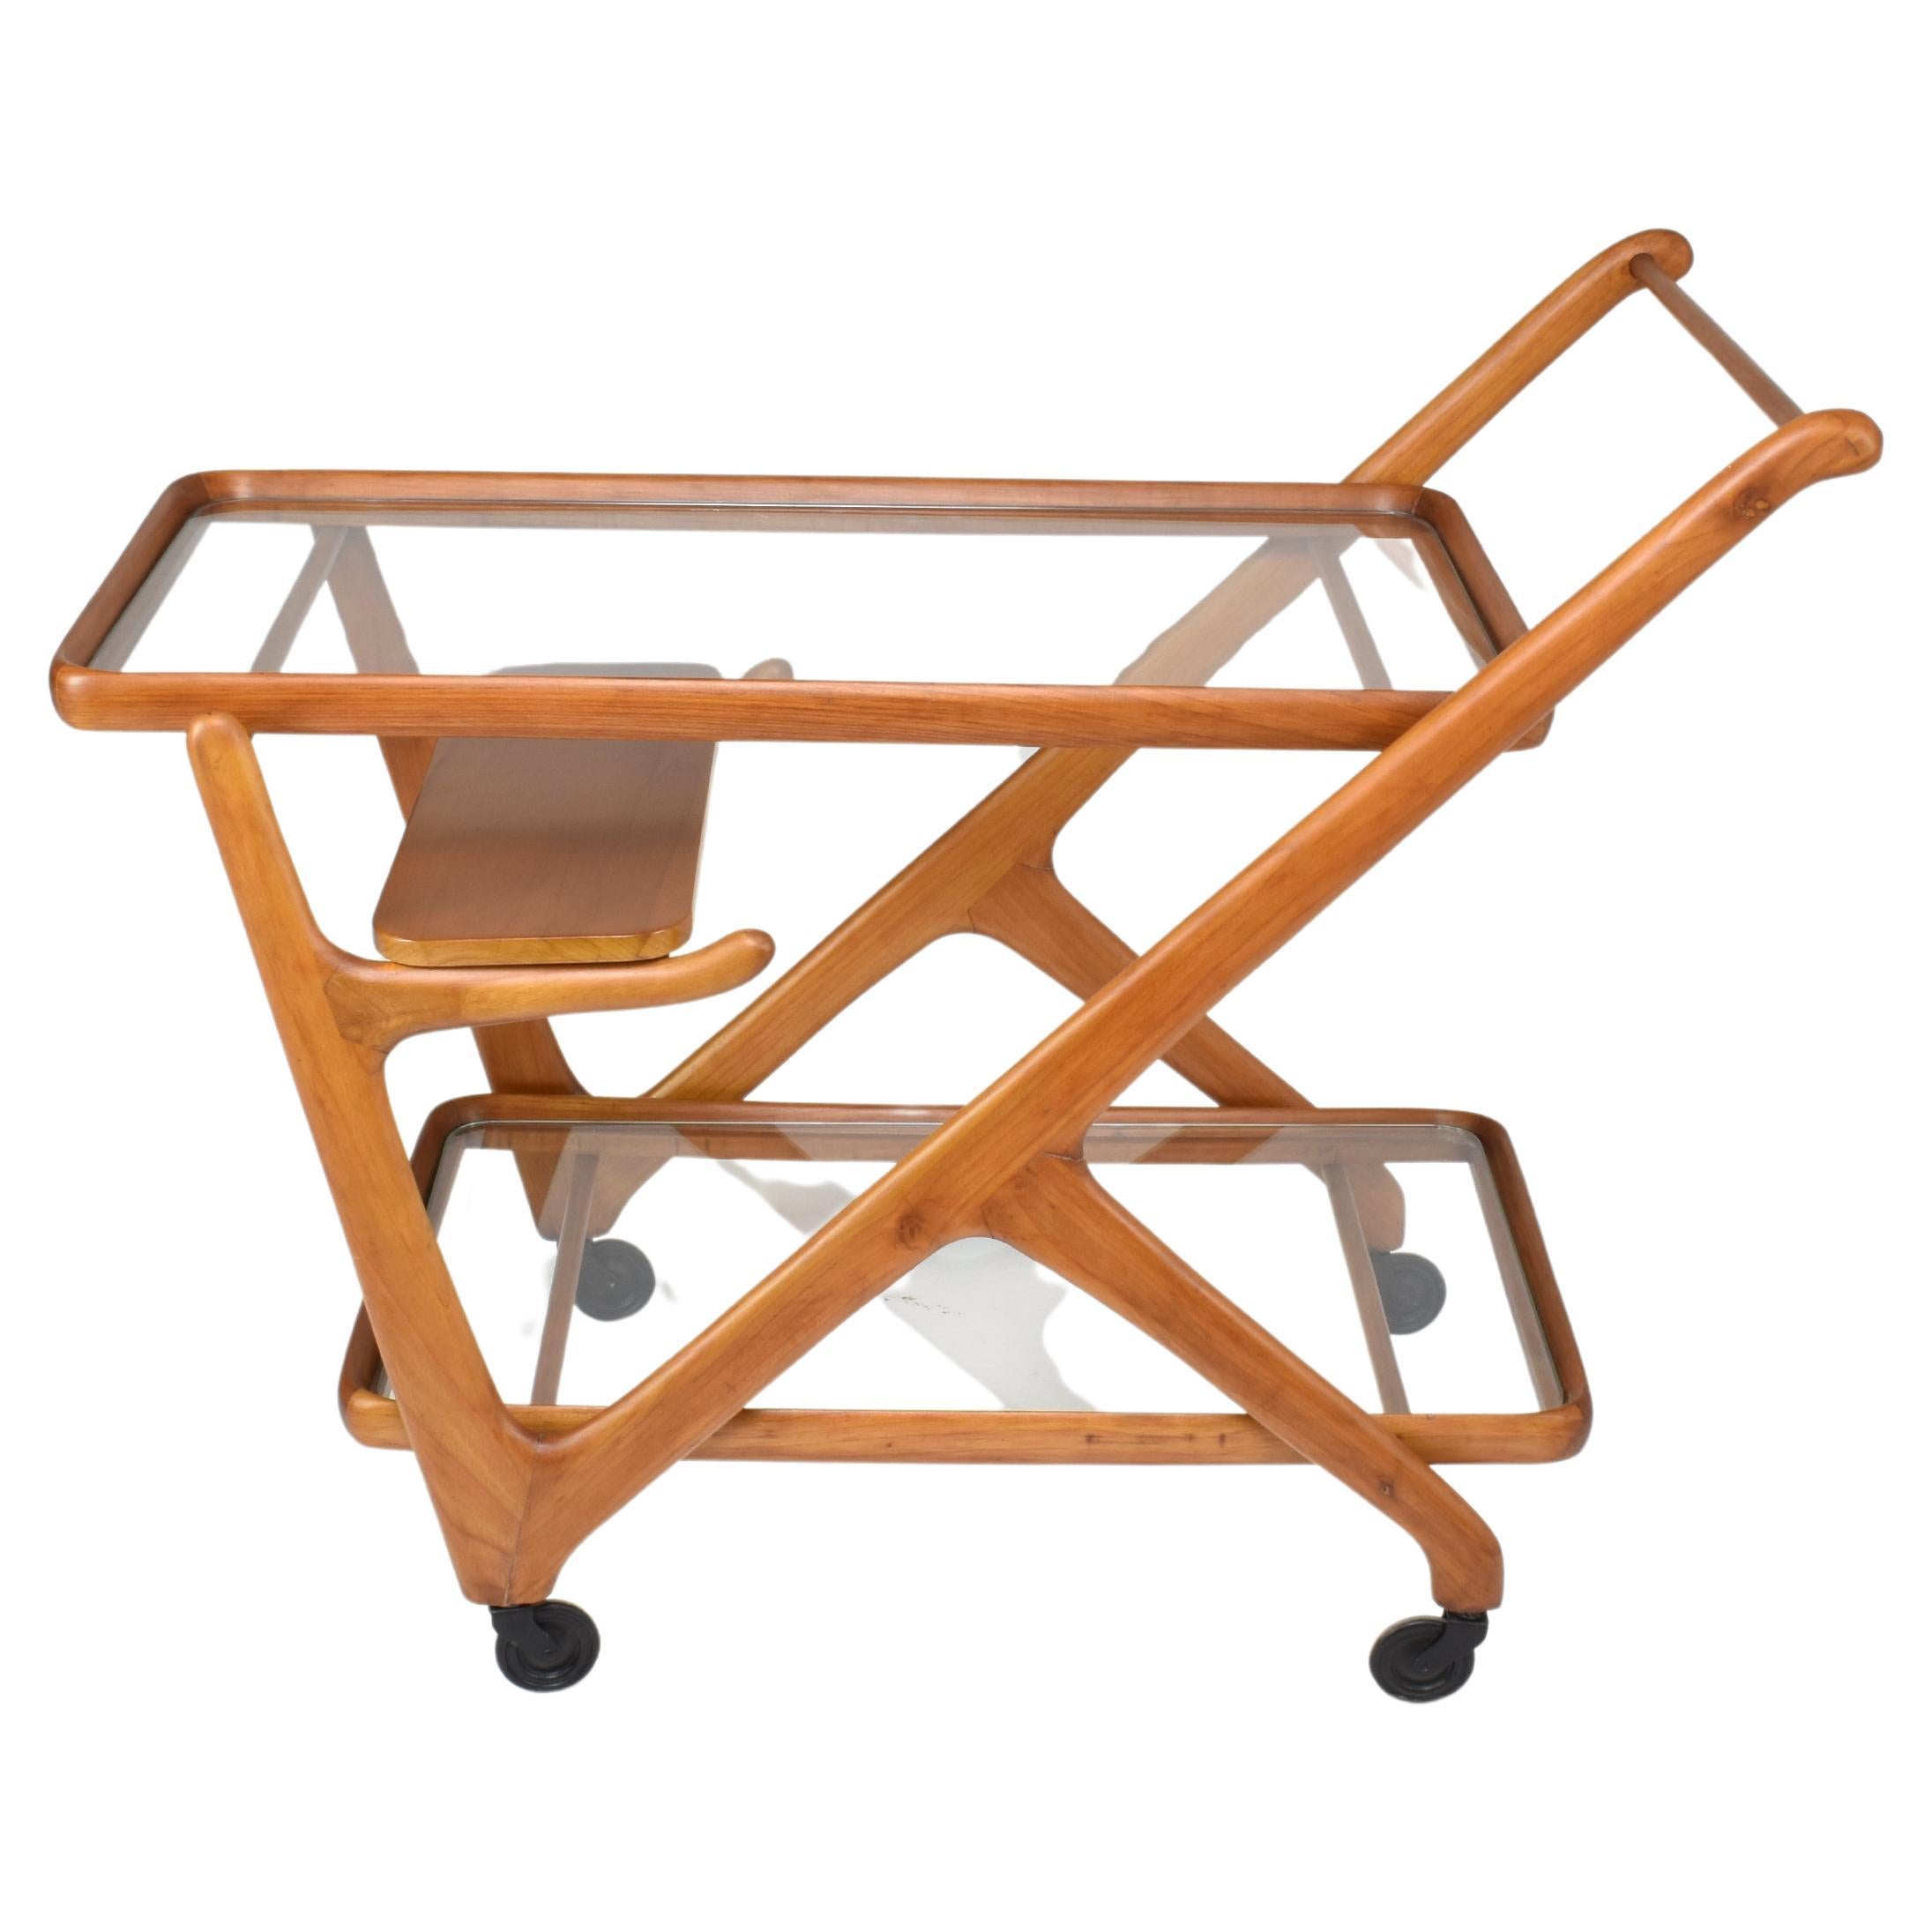 A striking 20th century Italian vintage serving bar cart with rollers designed by Cesare Lacca for Cassina in solid sculptural beechwood and glass. Designed with three removable trays and a comfortable handle, this stylish piece is the perfect